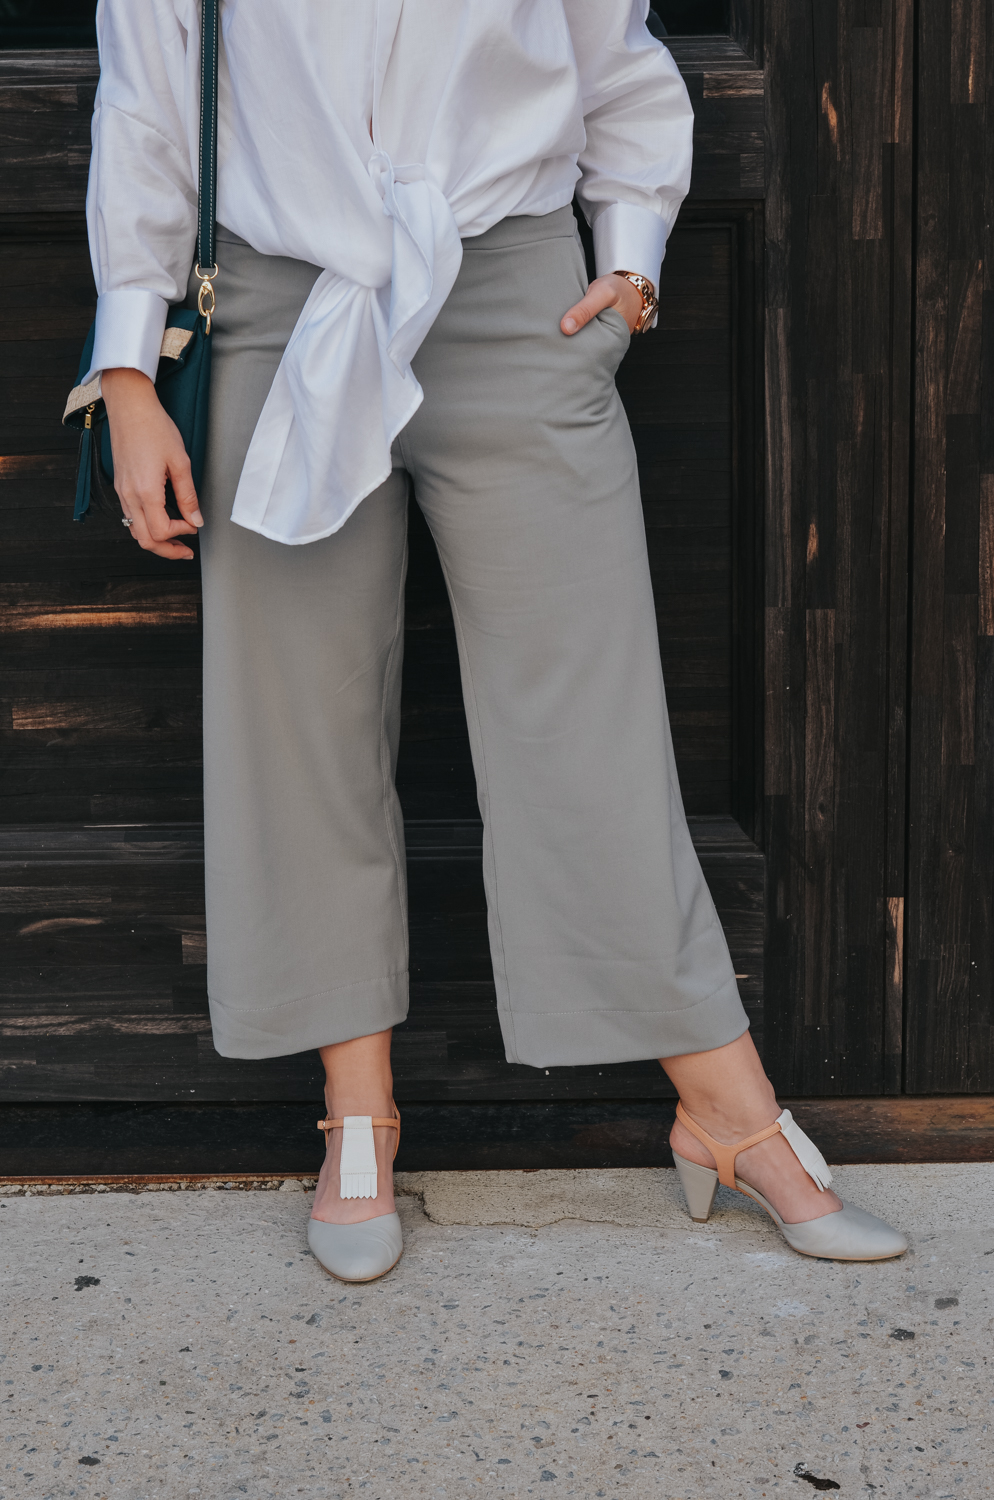 Narrow Arrow grey culottes and shirt, @alterreny shoes | fall fashion trends, wide leg pants, trending, new york fashion week, street style